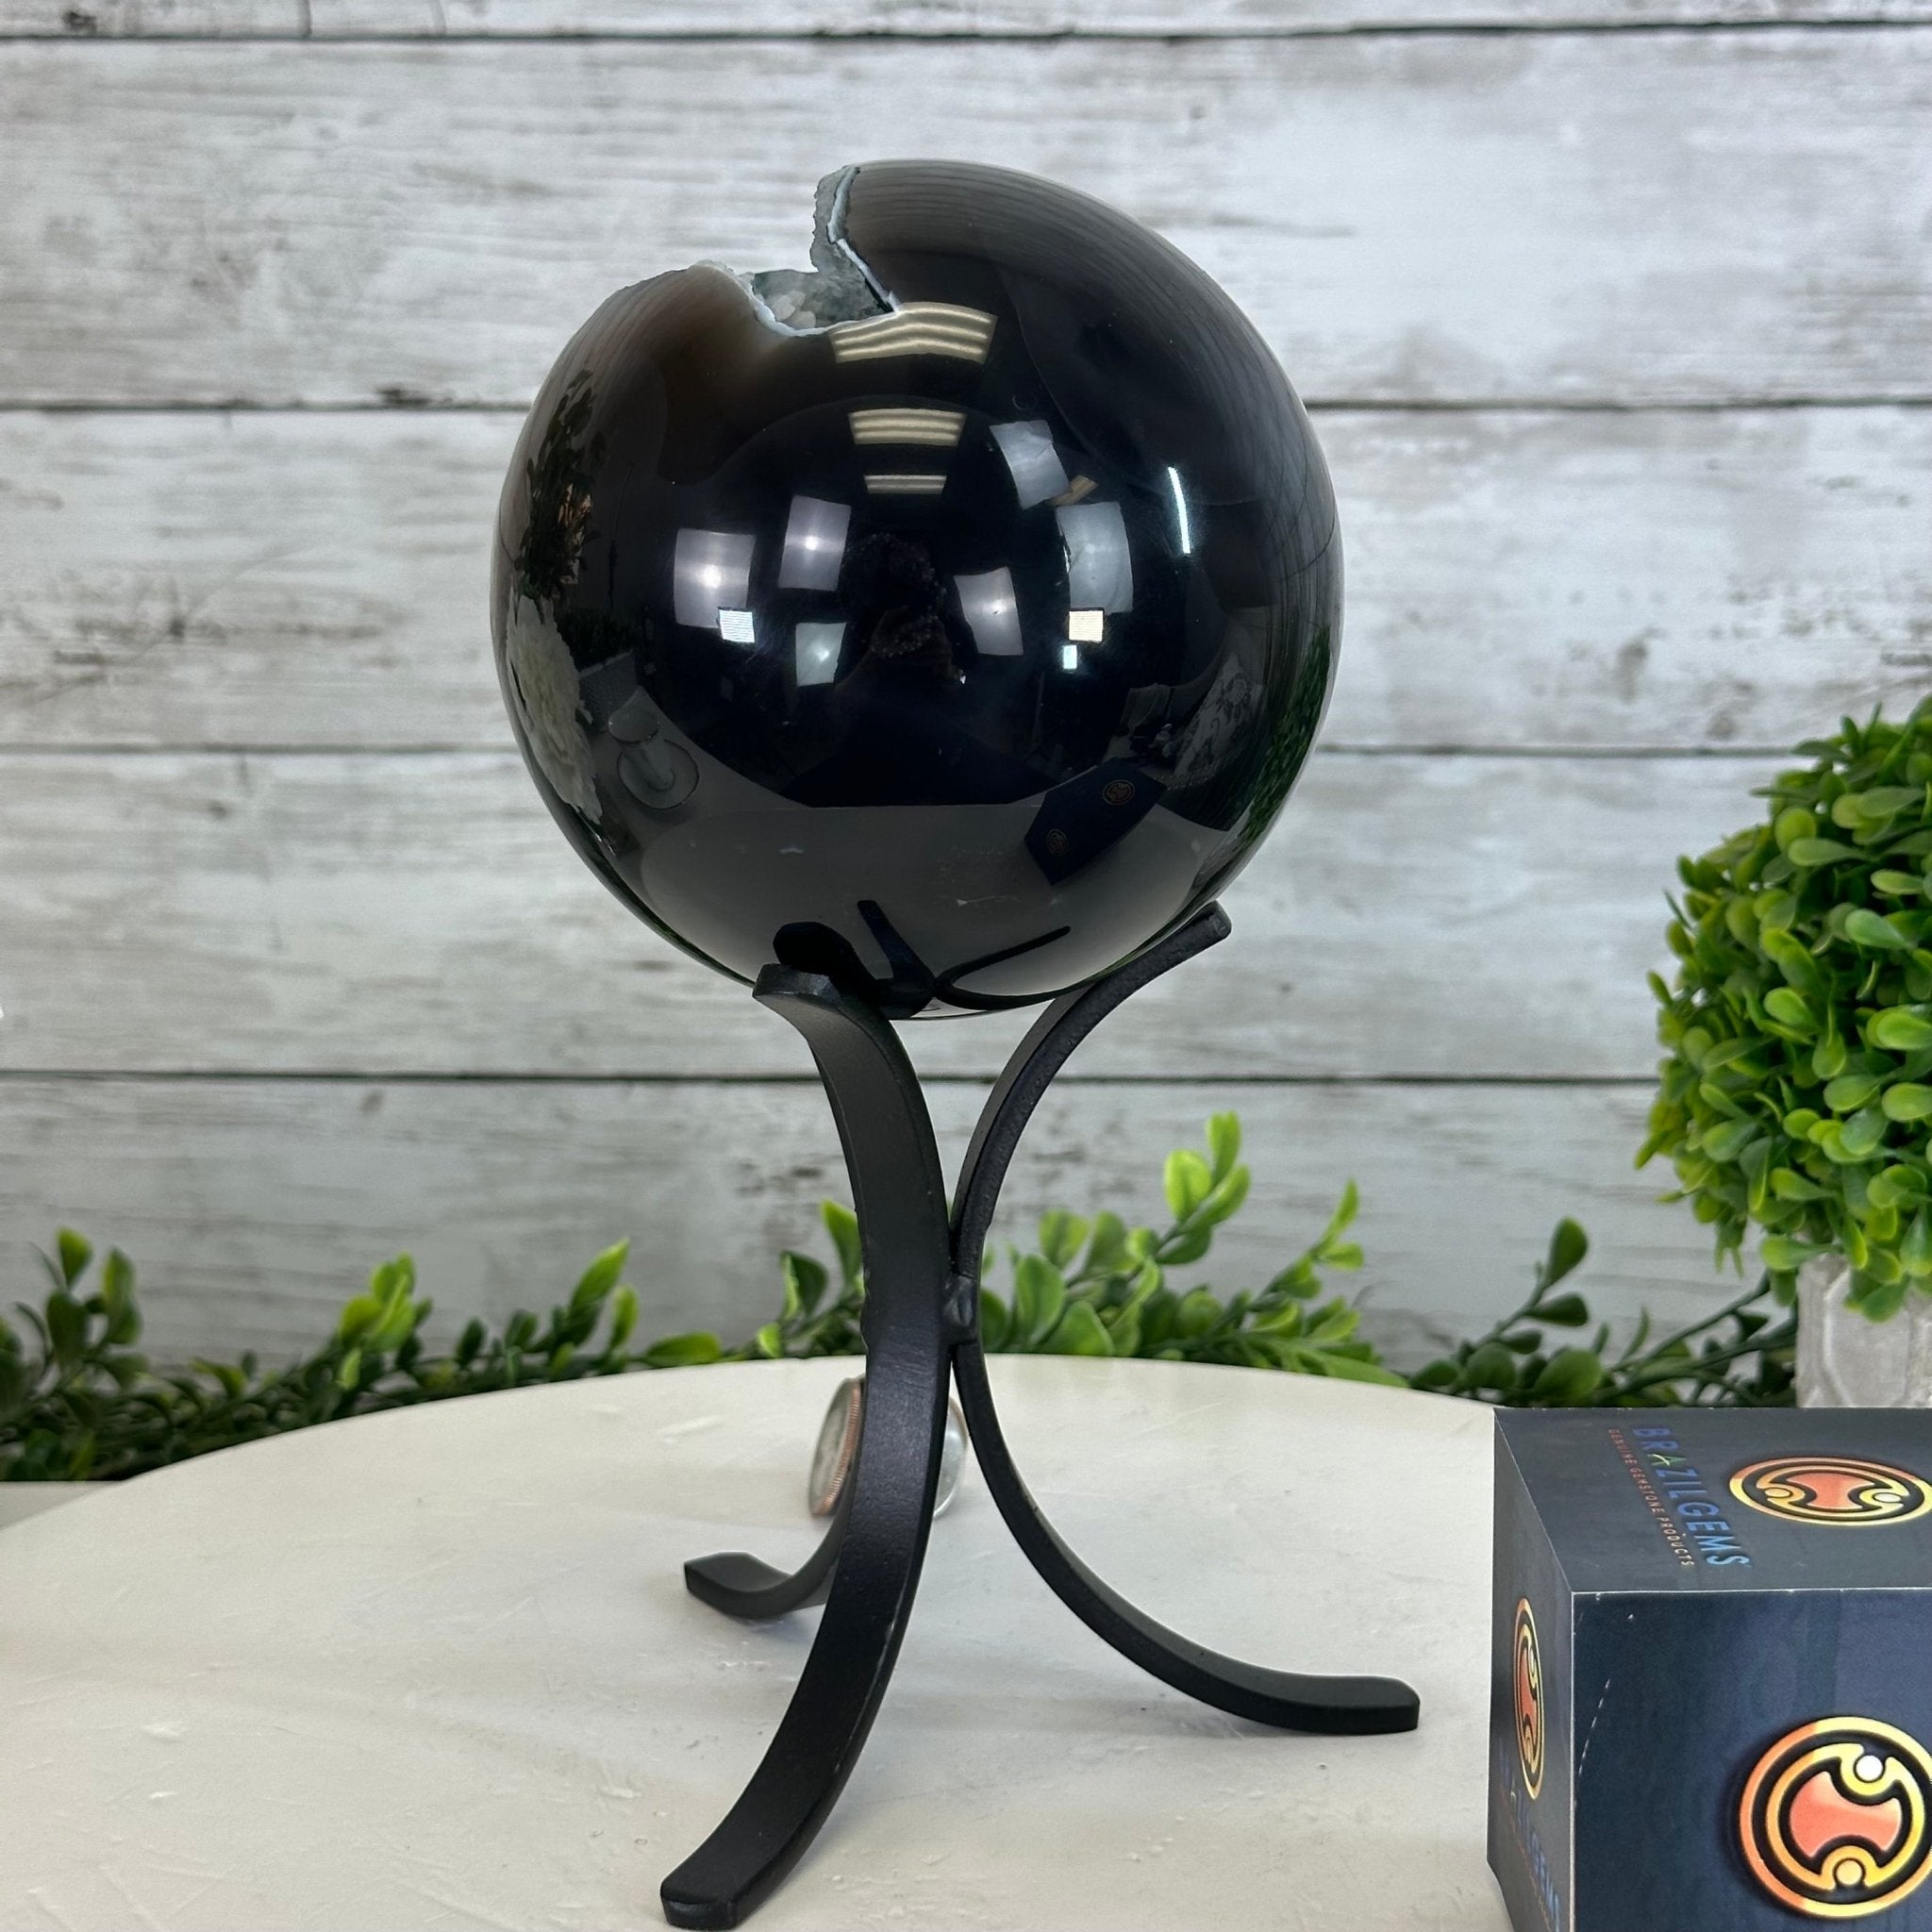 Druzy Agate Sphere on a Metal Stand, 3.9 lbs & 9.1" Tall #5634-0009 - Brazil GemsBrazil GemsDruzy Agate Sphere on a Metal Stand, 3.9 lbs & 9.1" Tall #5634-0009Spheres5634-0009